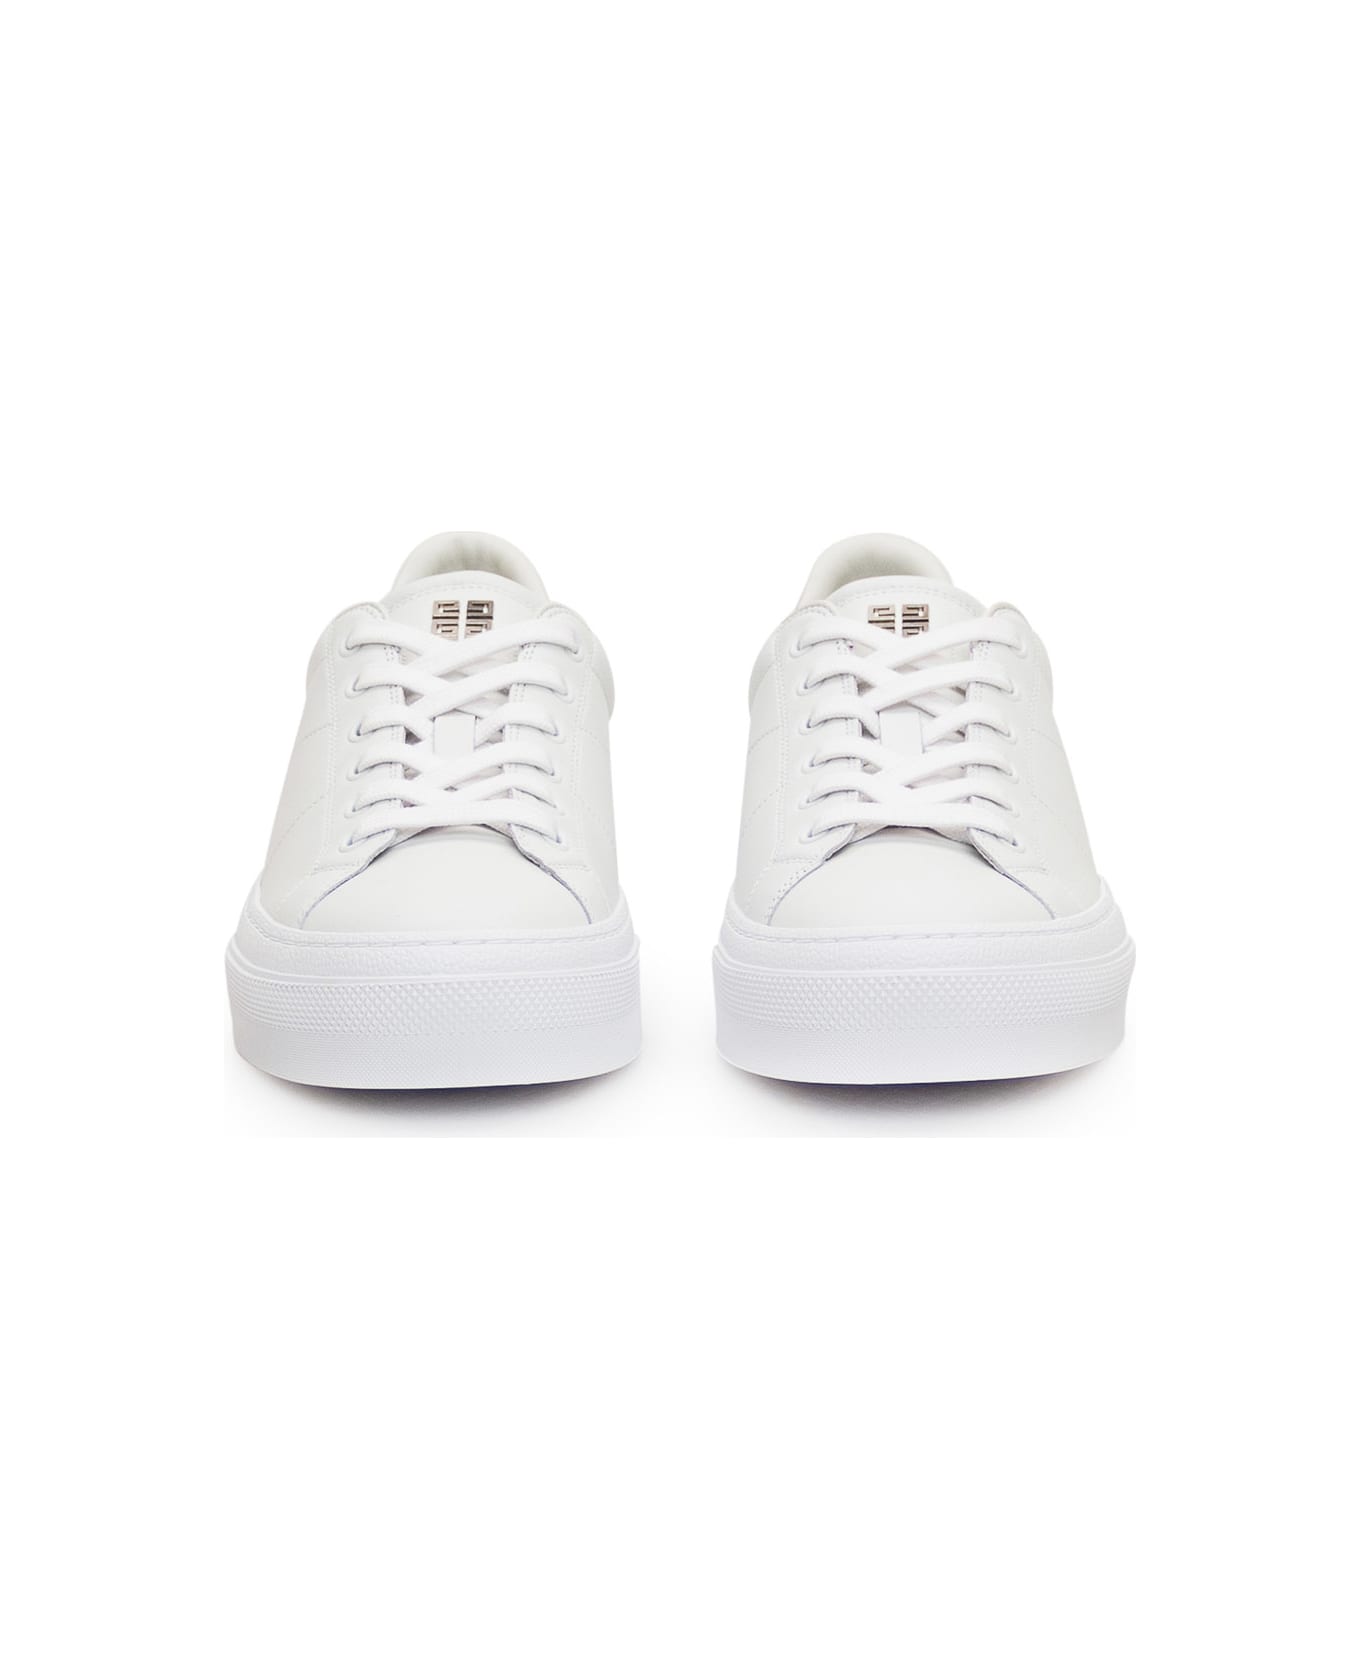 Givenchy City Sport Sneaker - WHITE GREY